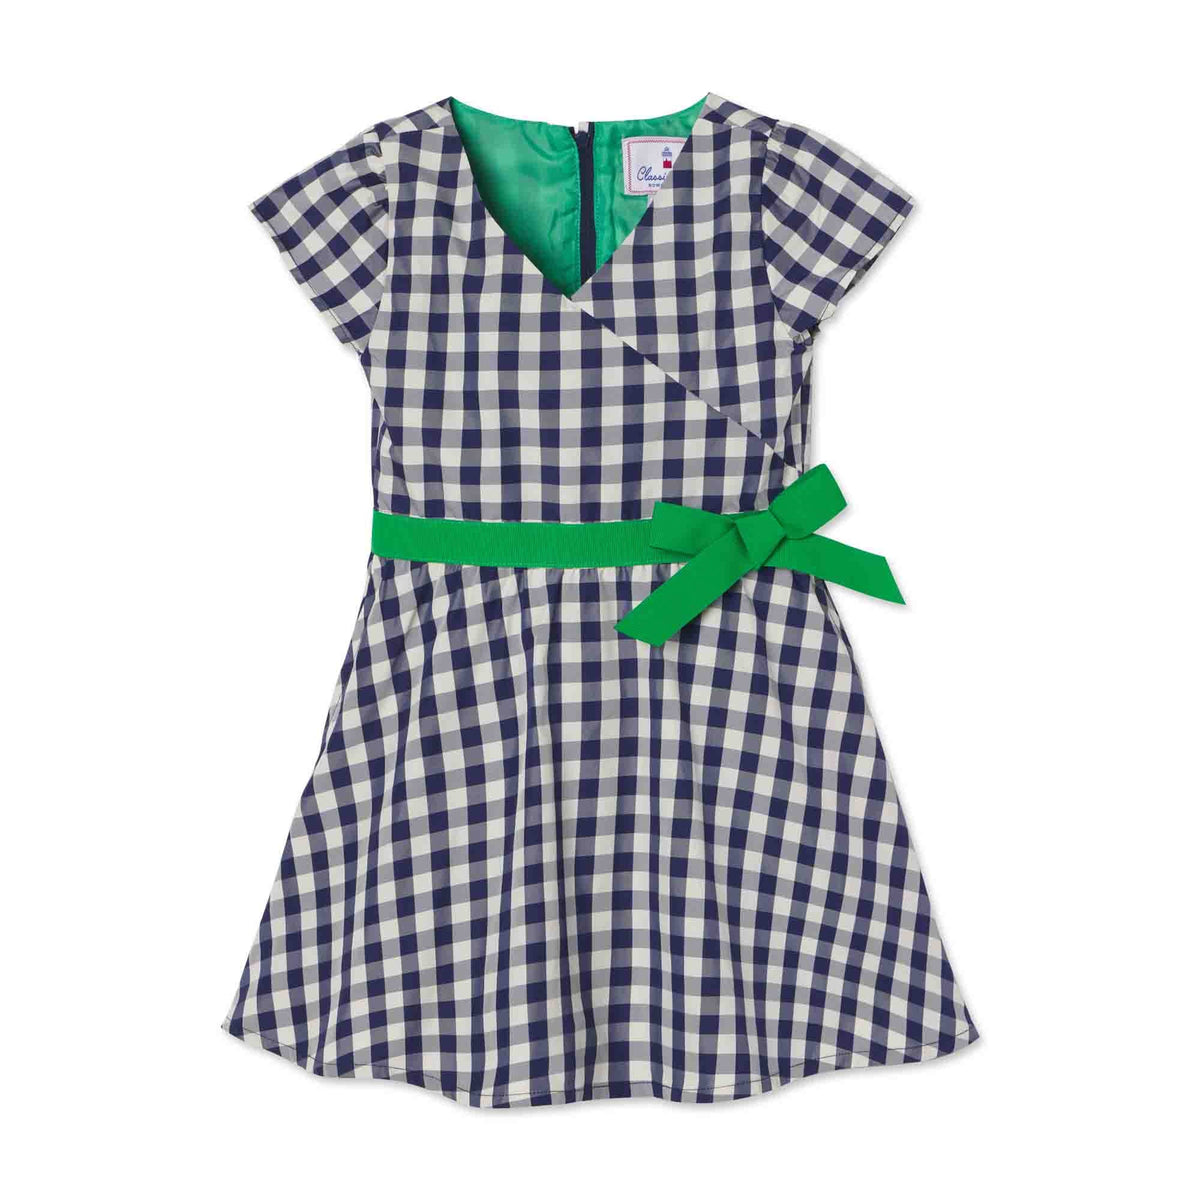 Classic and Preppy Ann Dress, Midnight Gingham Taffeta-Dresses, Jumpsuits and Rompers-Midnight Gingham-2T-CPC - Classic Prep Childrenswear